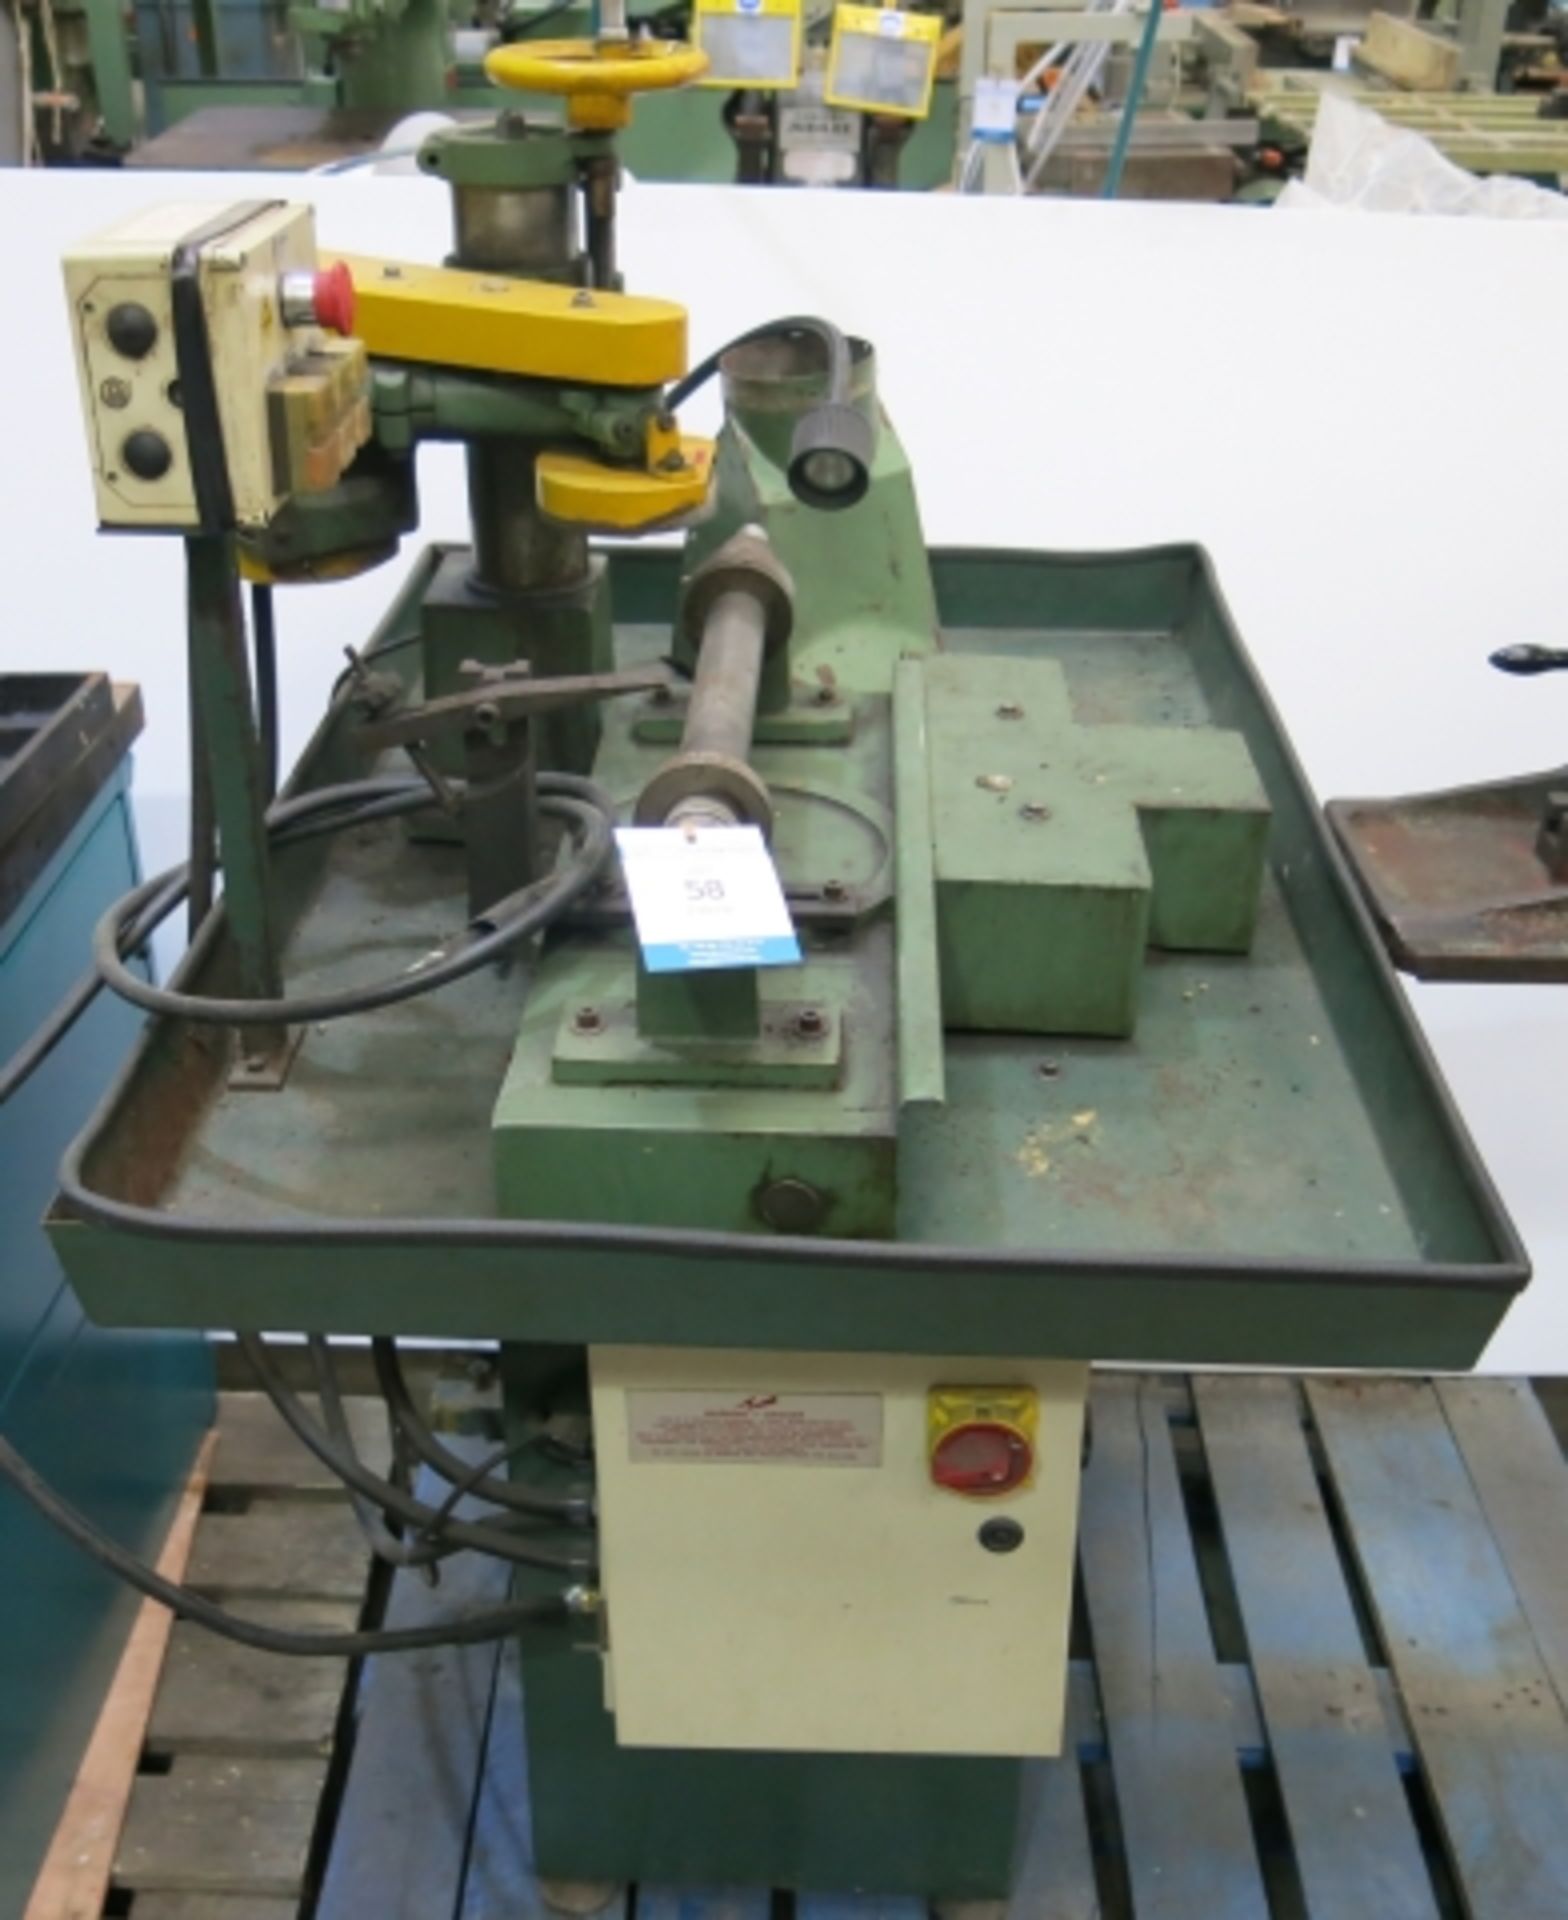 * Autool Cutter Grinder; 3 phase; serial number 19716/PB300. Please note there is a £5 plus VAT Lift